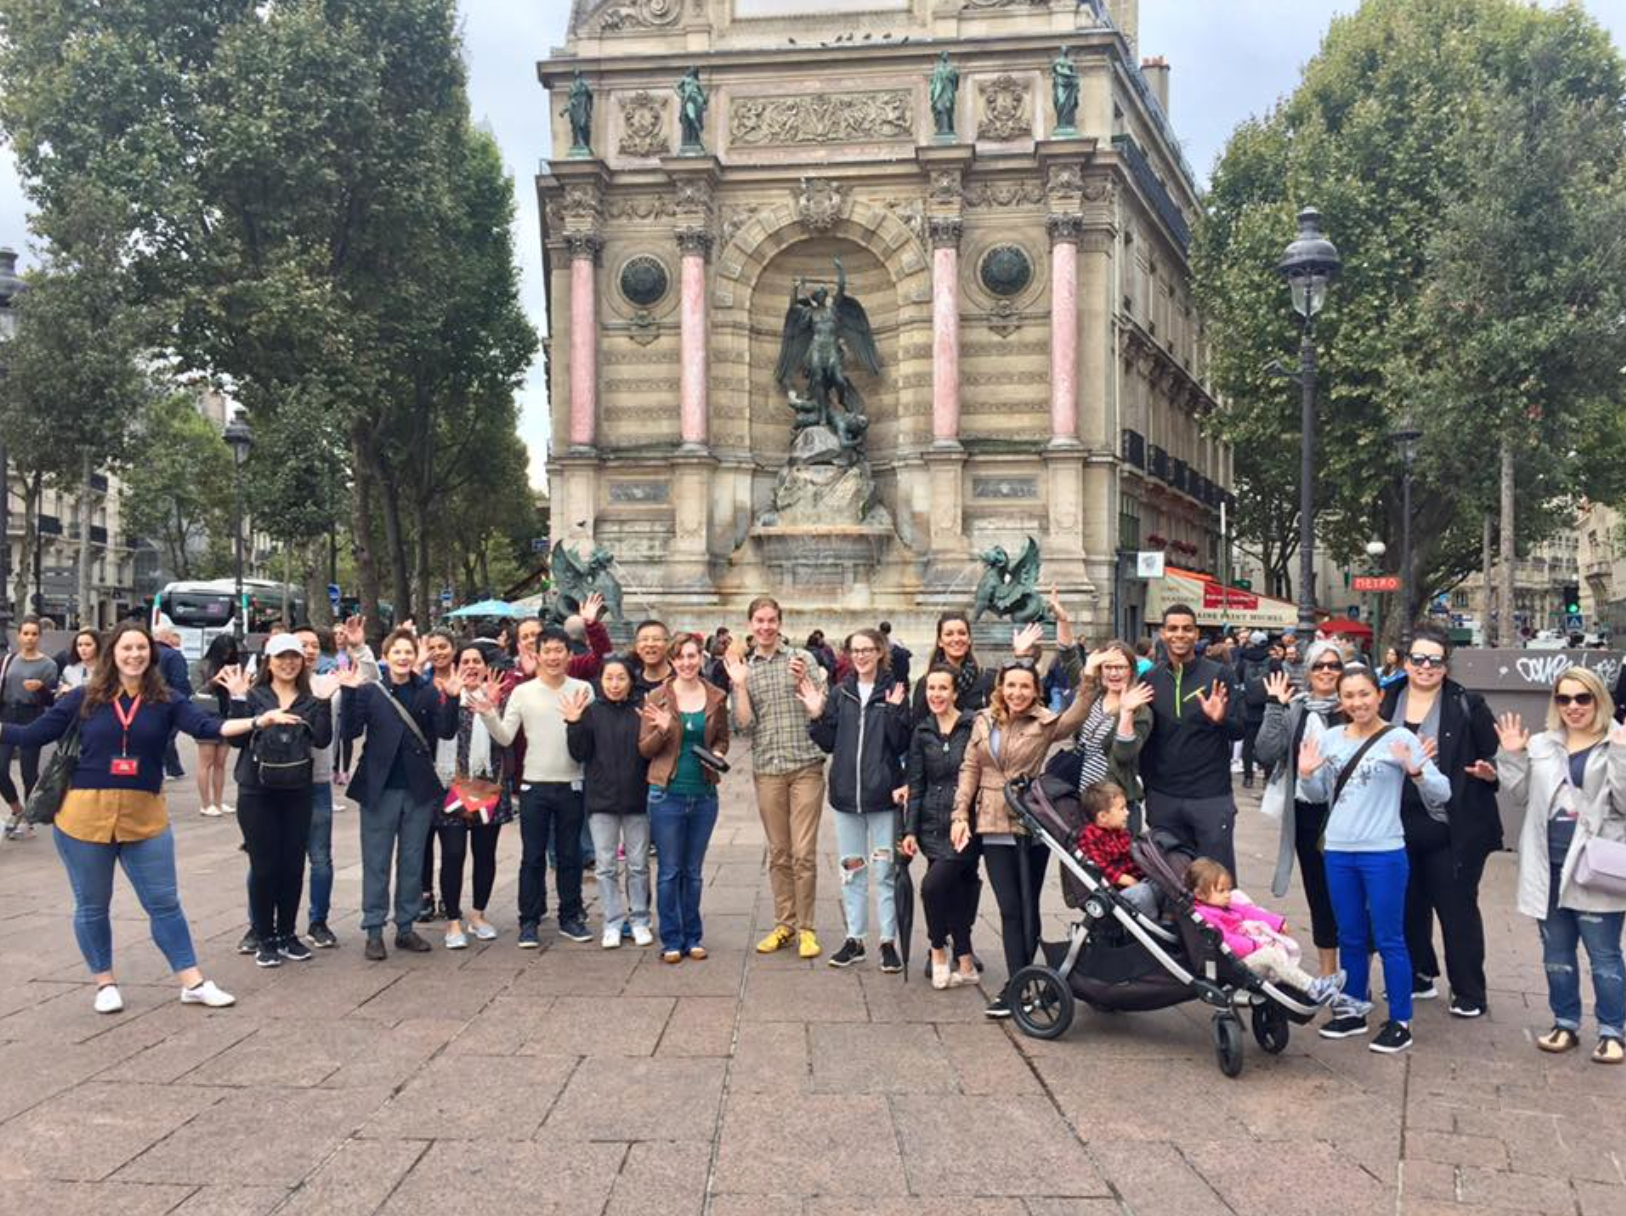 a group of people posing for a photo in front of a statue